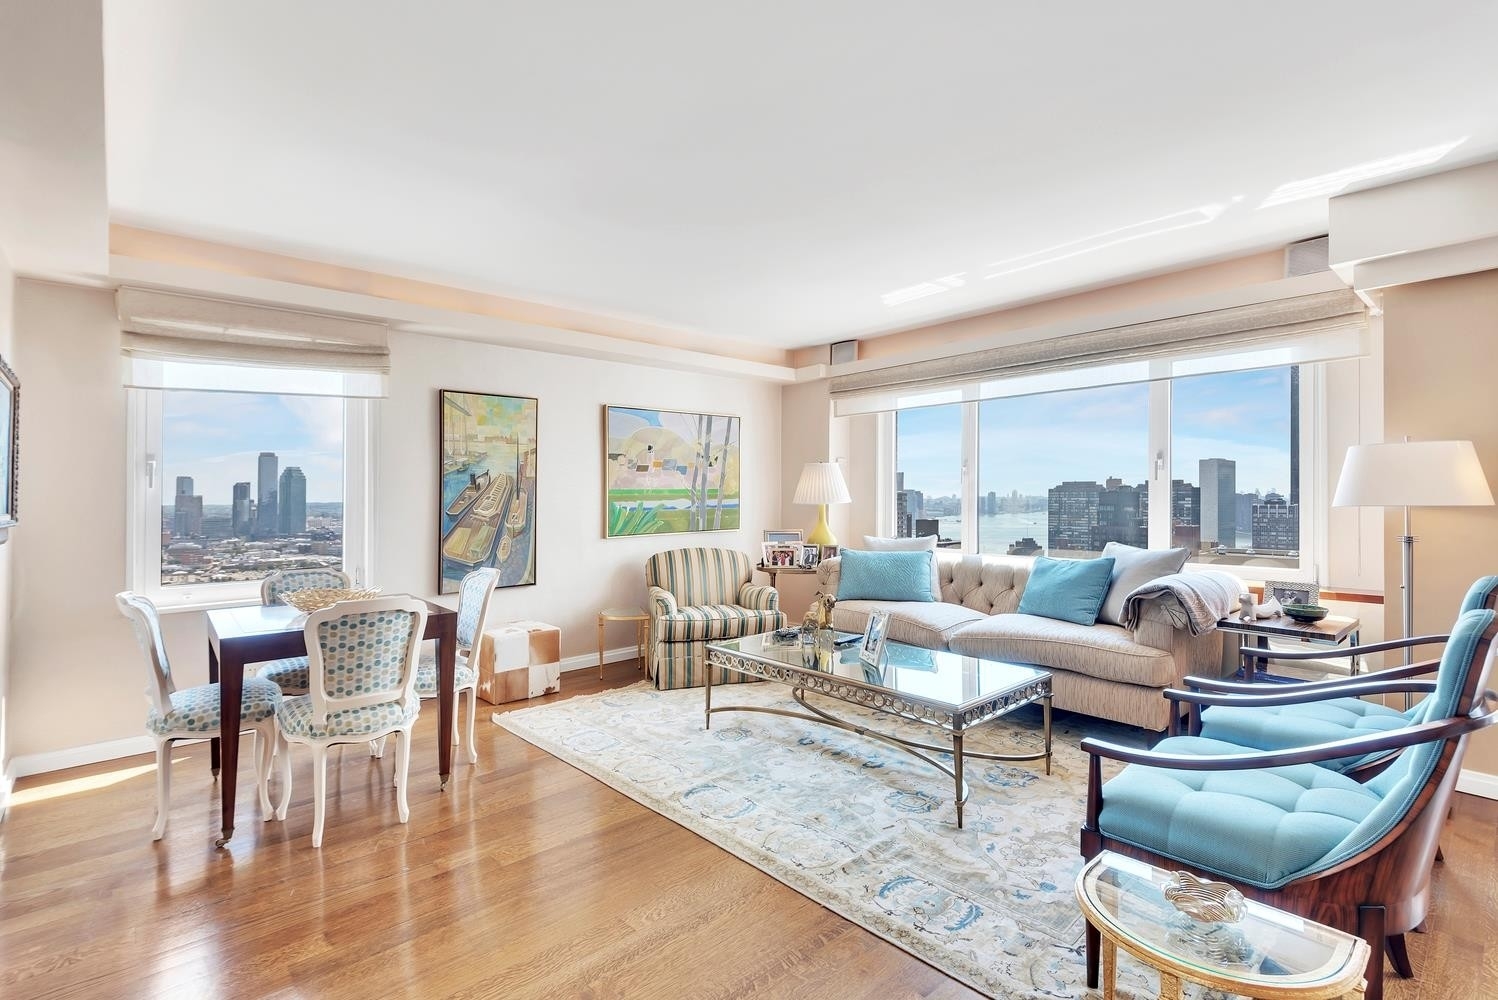 Co-op Properties for Sale at The Excelsior, 303 E 57TH ST, 35G Midtown East, New York, NY 10022